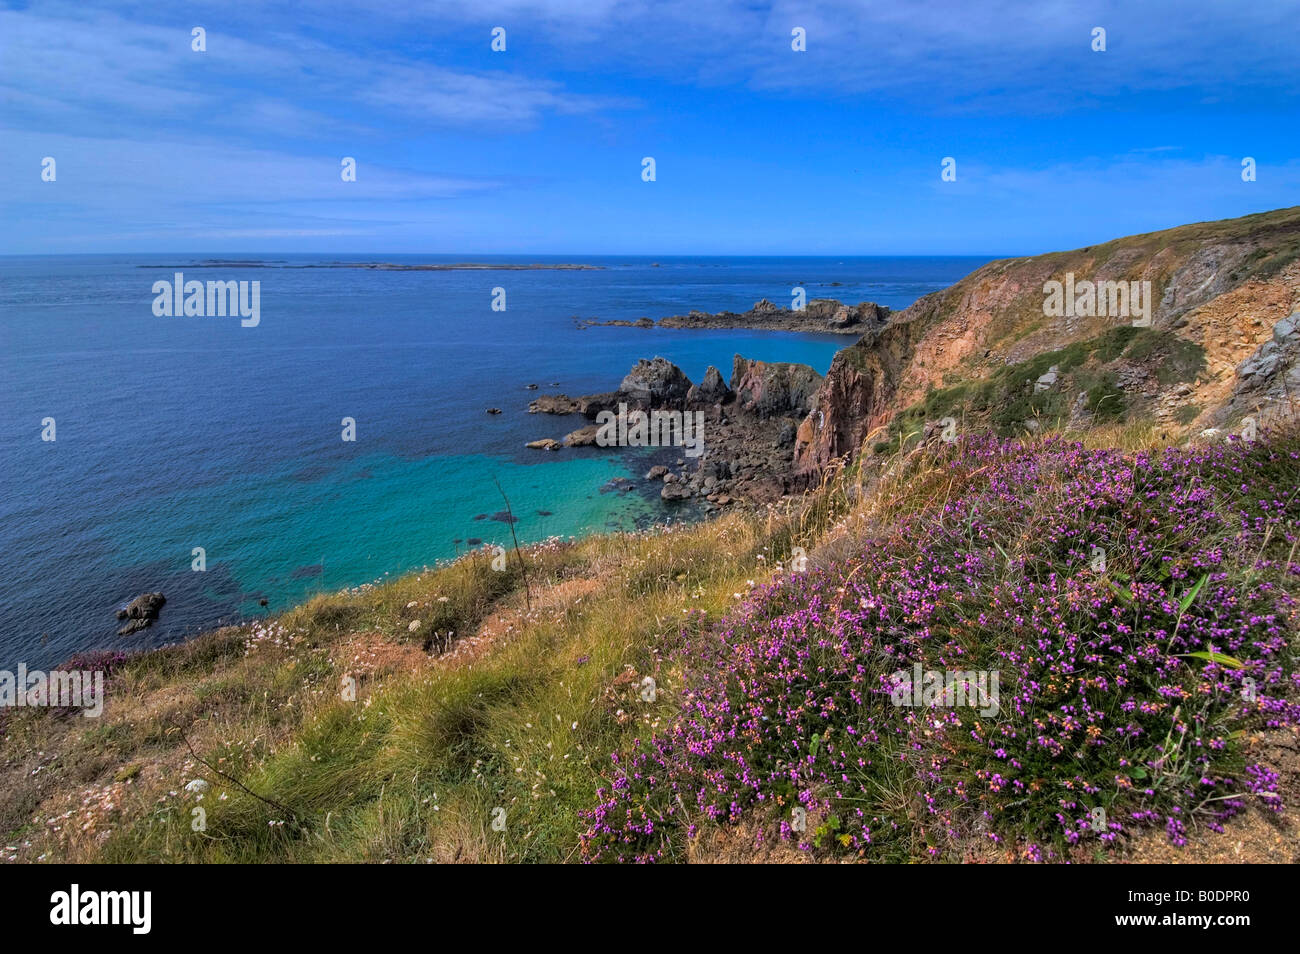 The island of Alderney in the Channel Islands United Kingdom Picture by Andrew Hasson July 18th 2004 Stock Photo